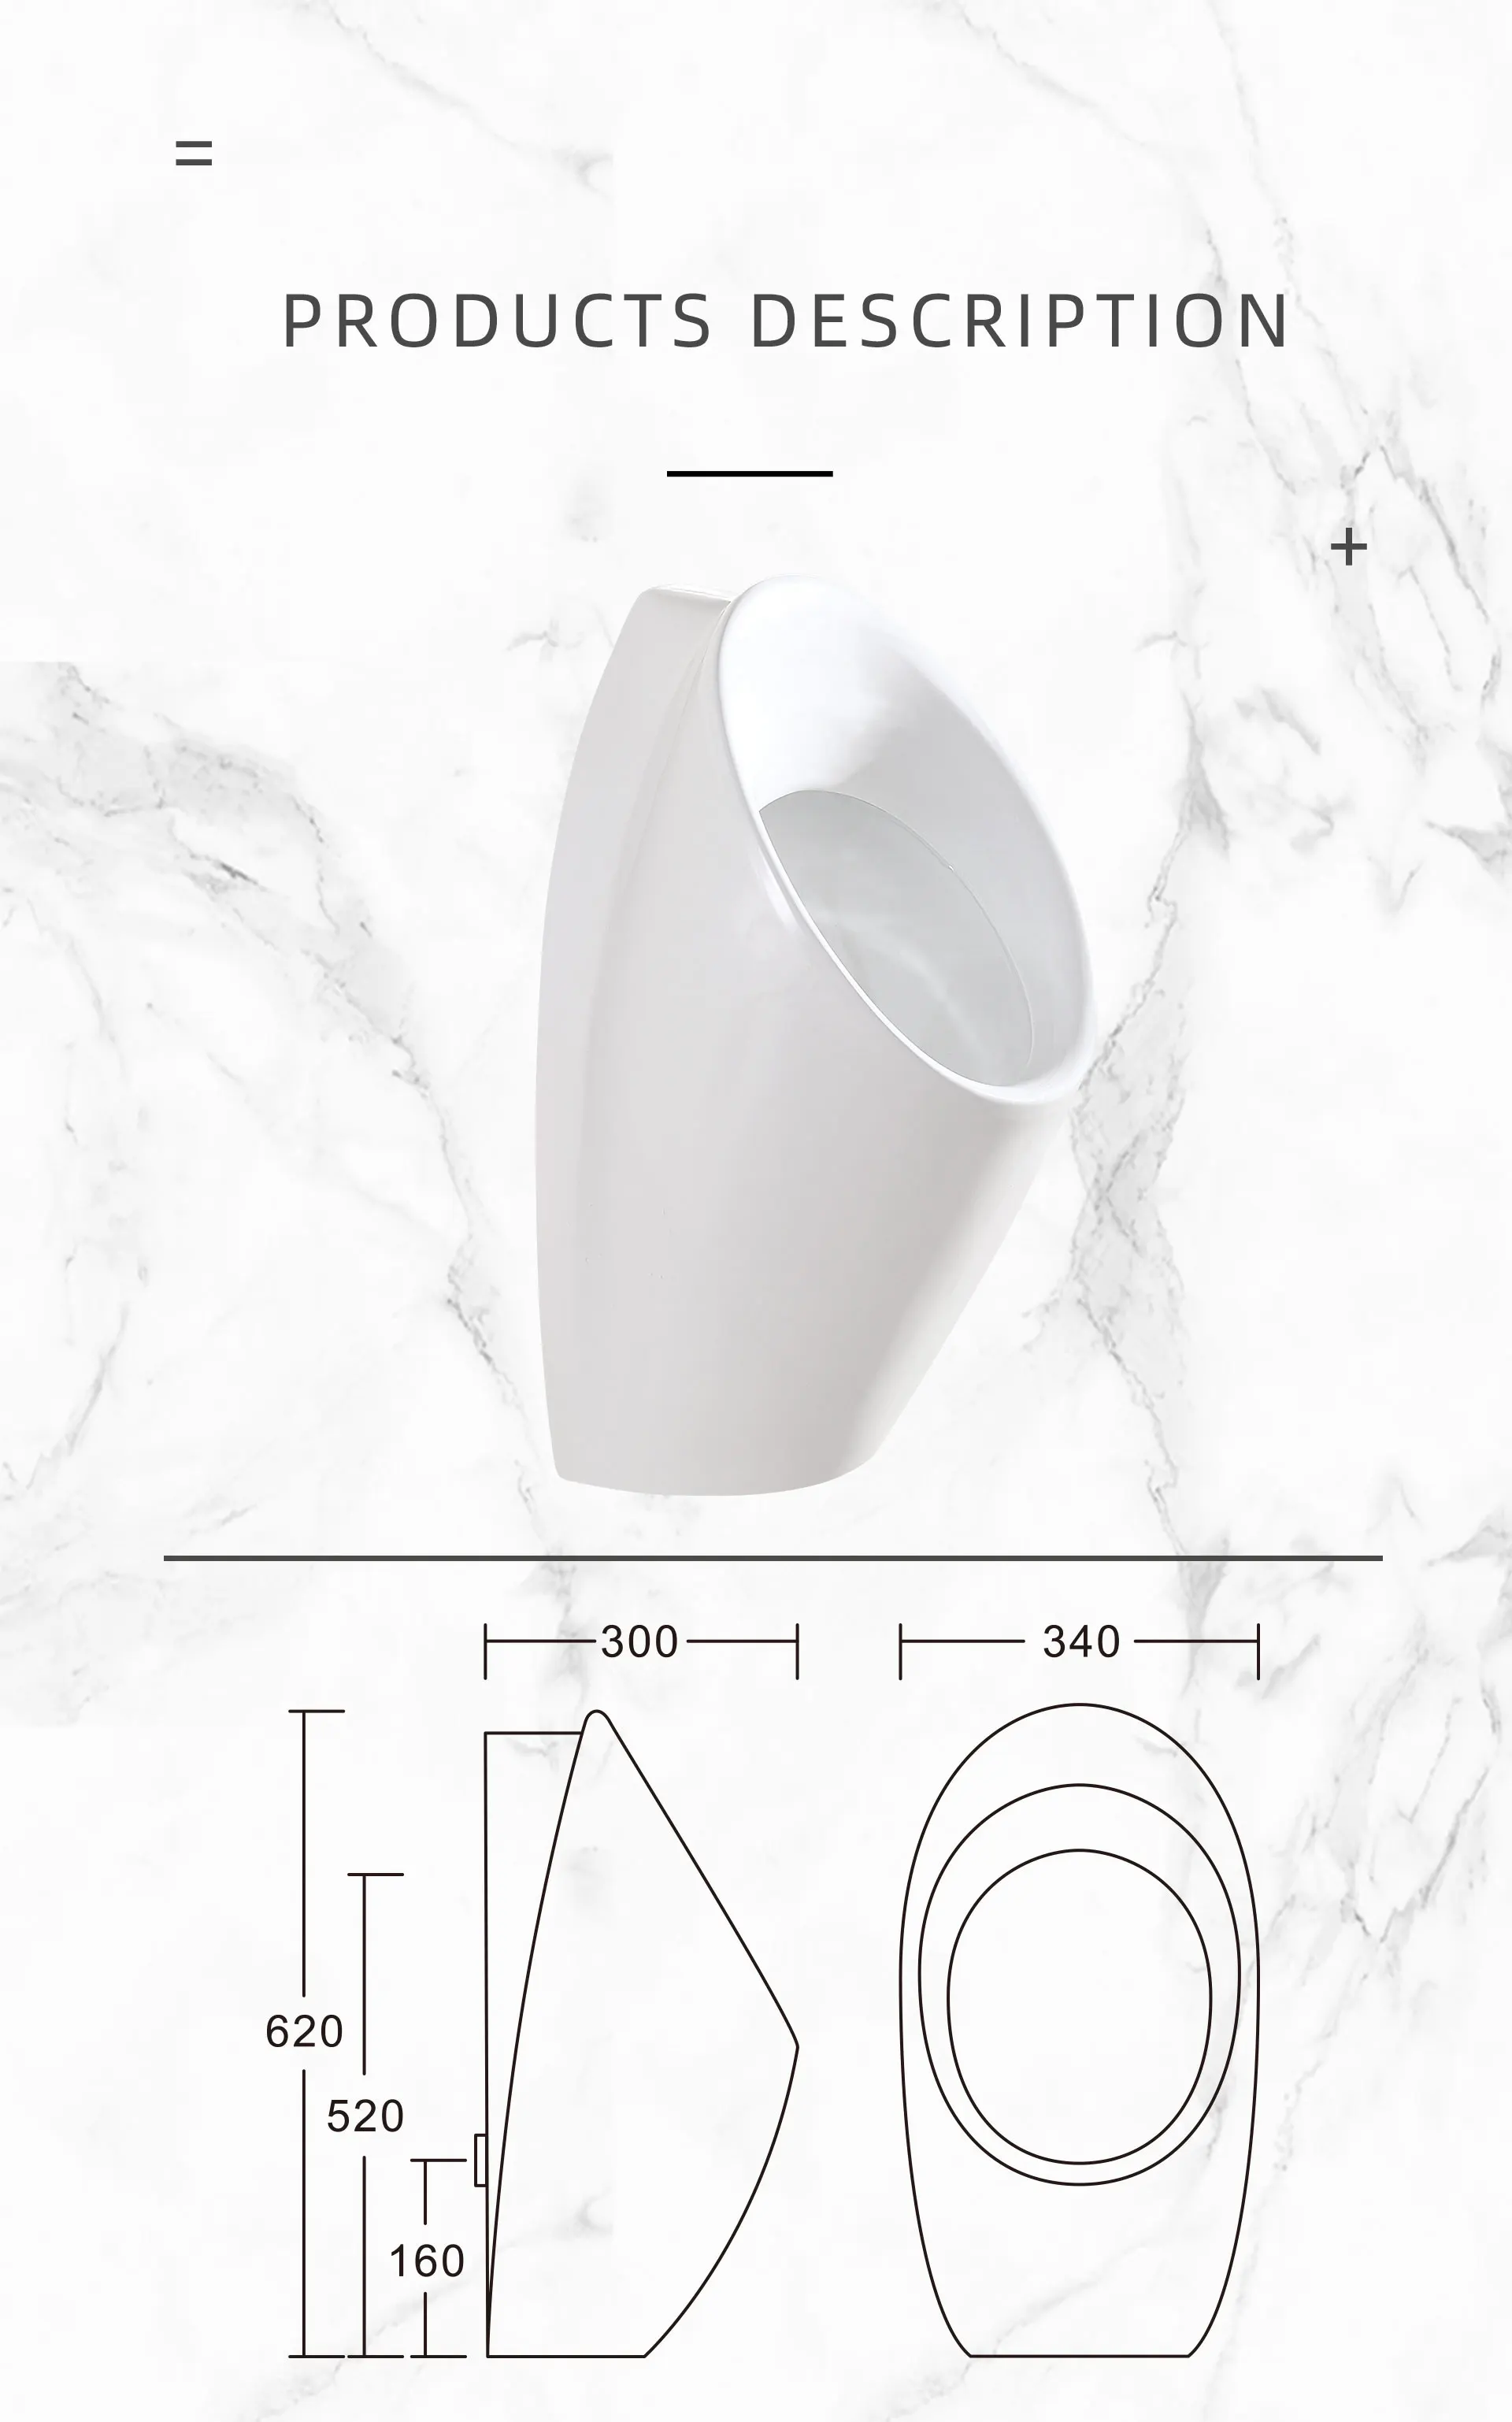 Vieany 2022 OK-2576 urinal for men Induction Urinal Male Ceramic Wall Mounted Urinal Toilet Bowl For Male